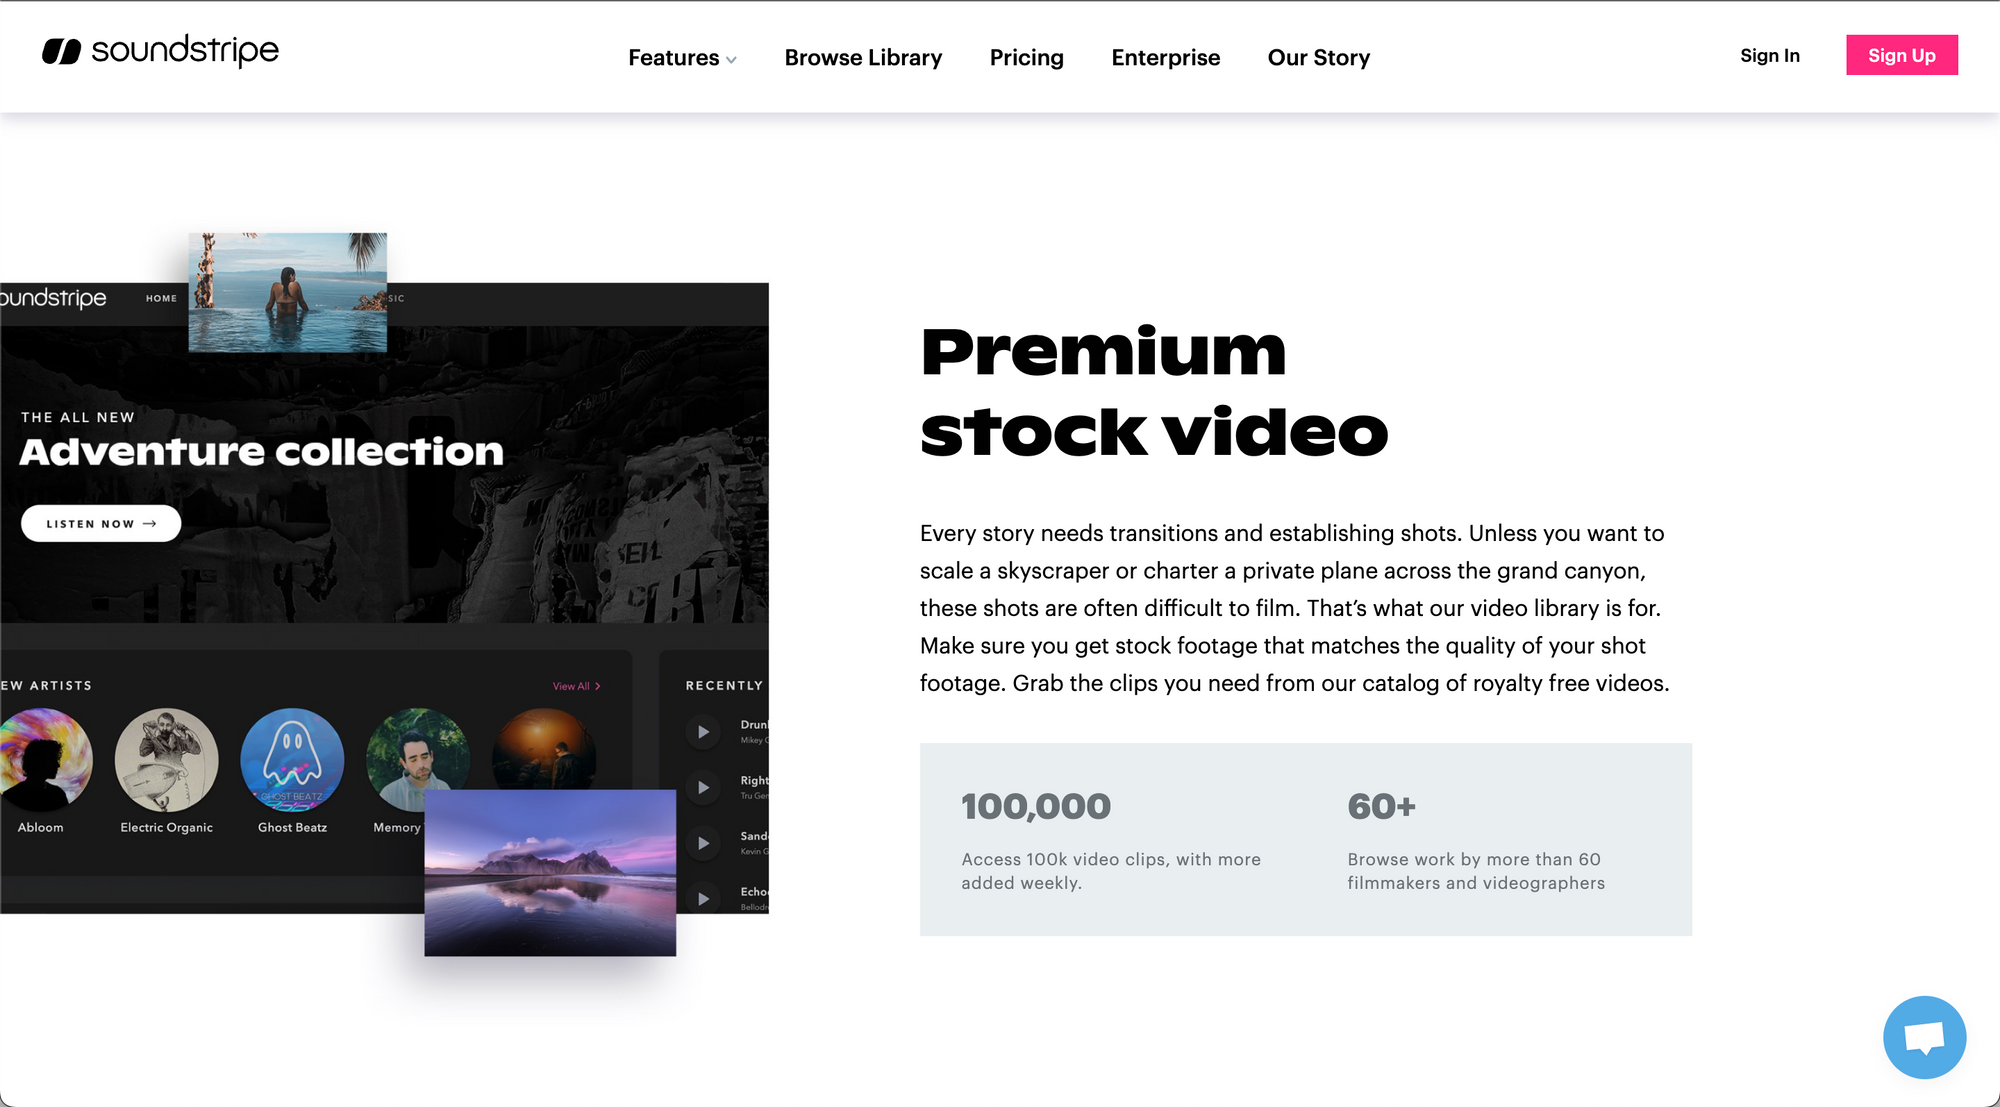 Soundstripe releases Premium library of royalty free videos 